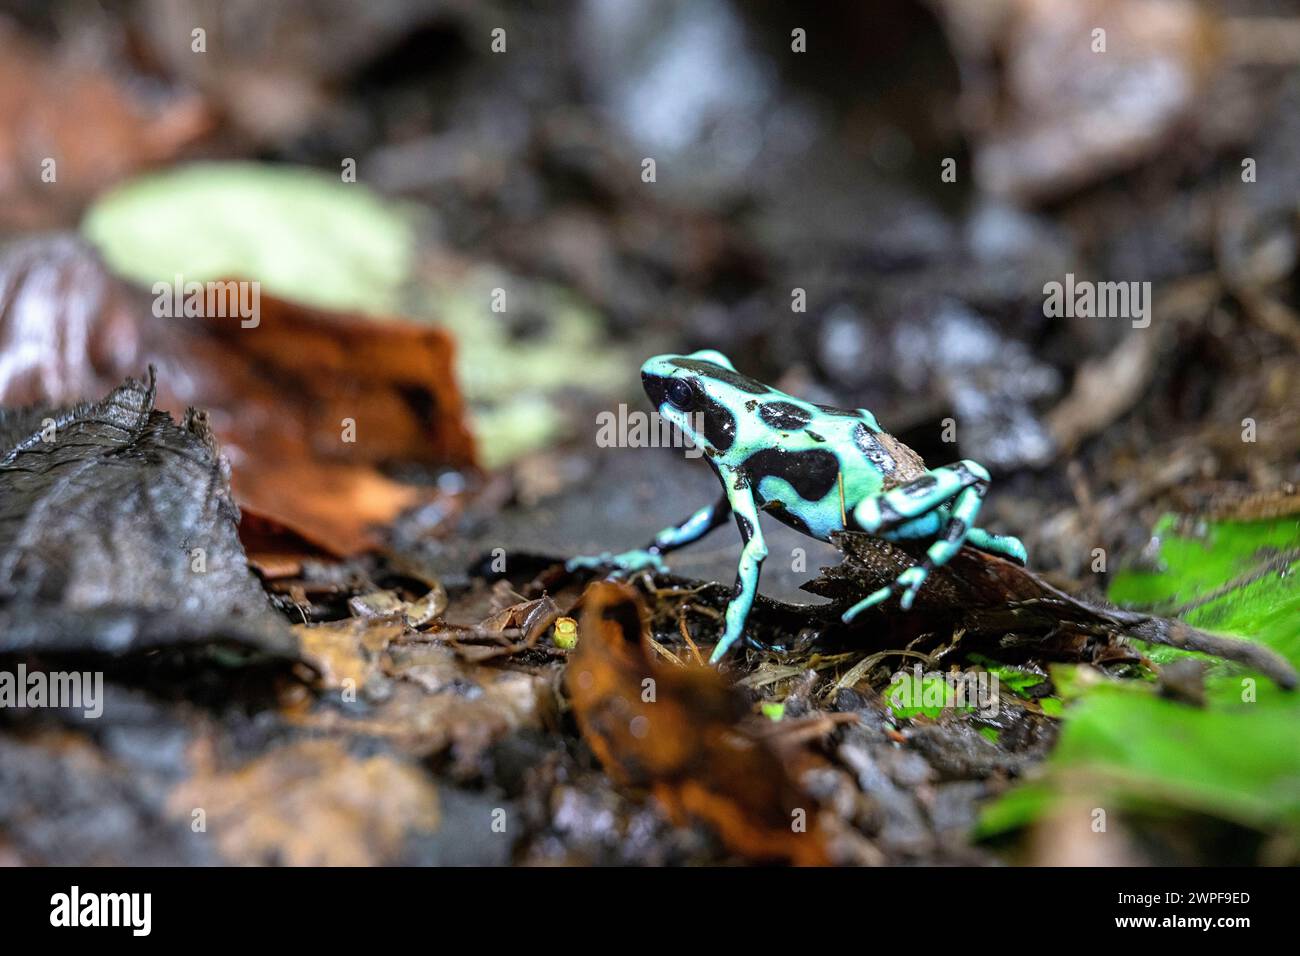 Green and black poison arrow frog (Dendrobates auratus), morph, on the floor in a rainforest in Panama, Bocas del Toro Stock Photo